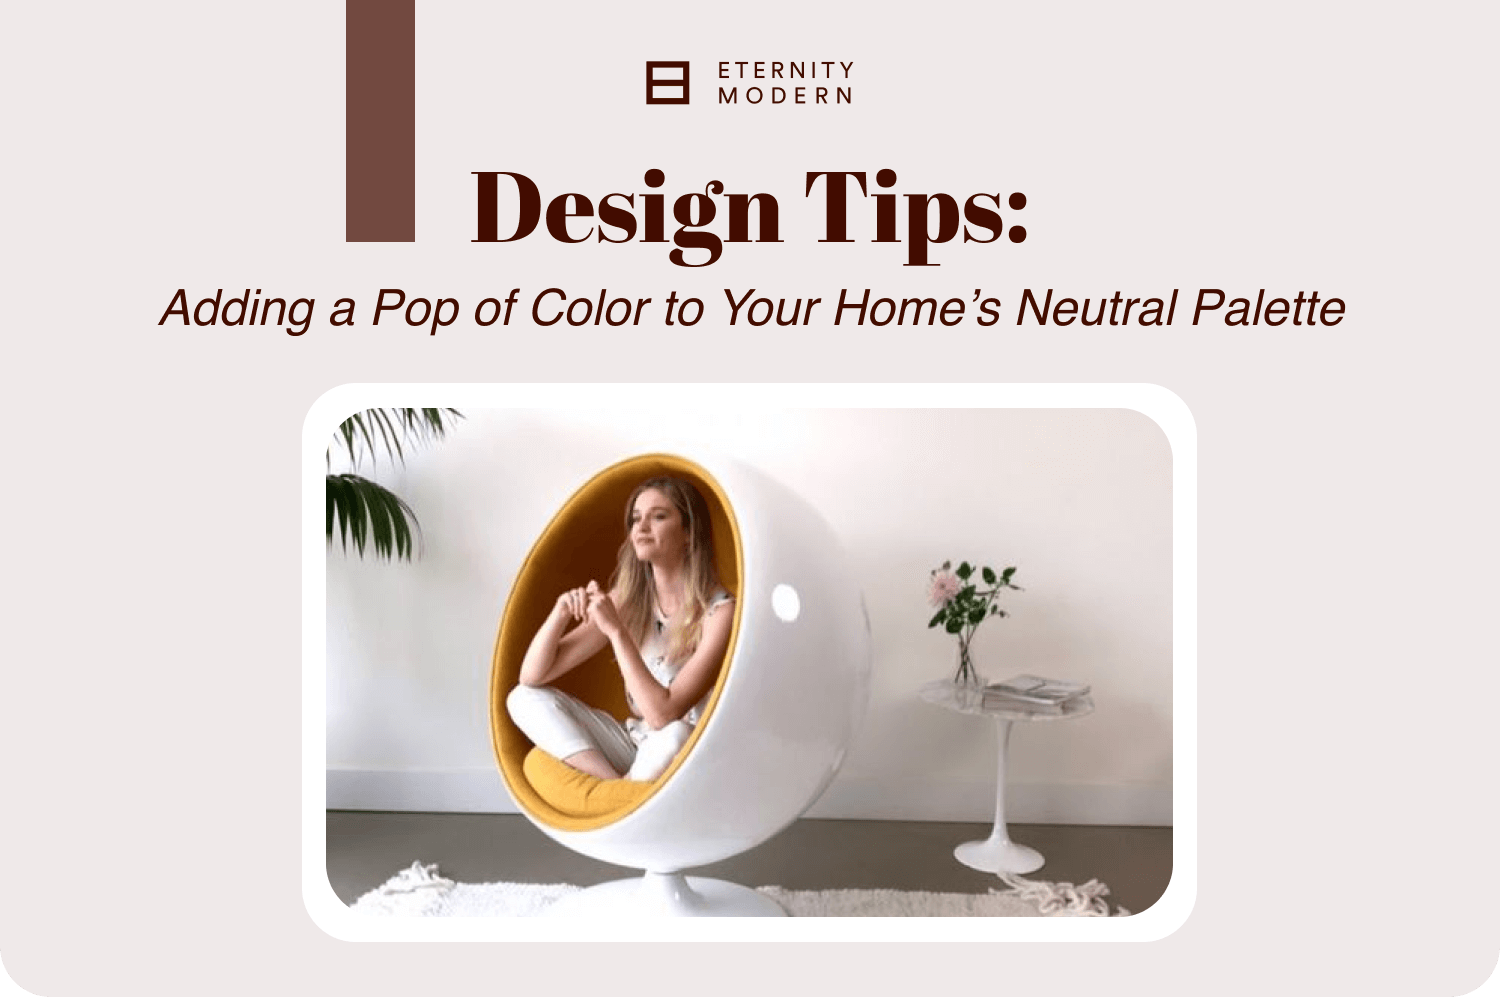 Design Tips: Adding a Pop of Color to Your Home’s Neutral Palette